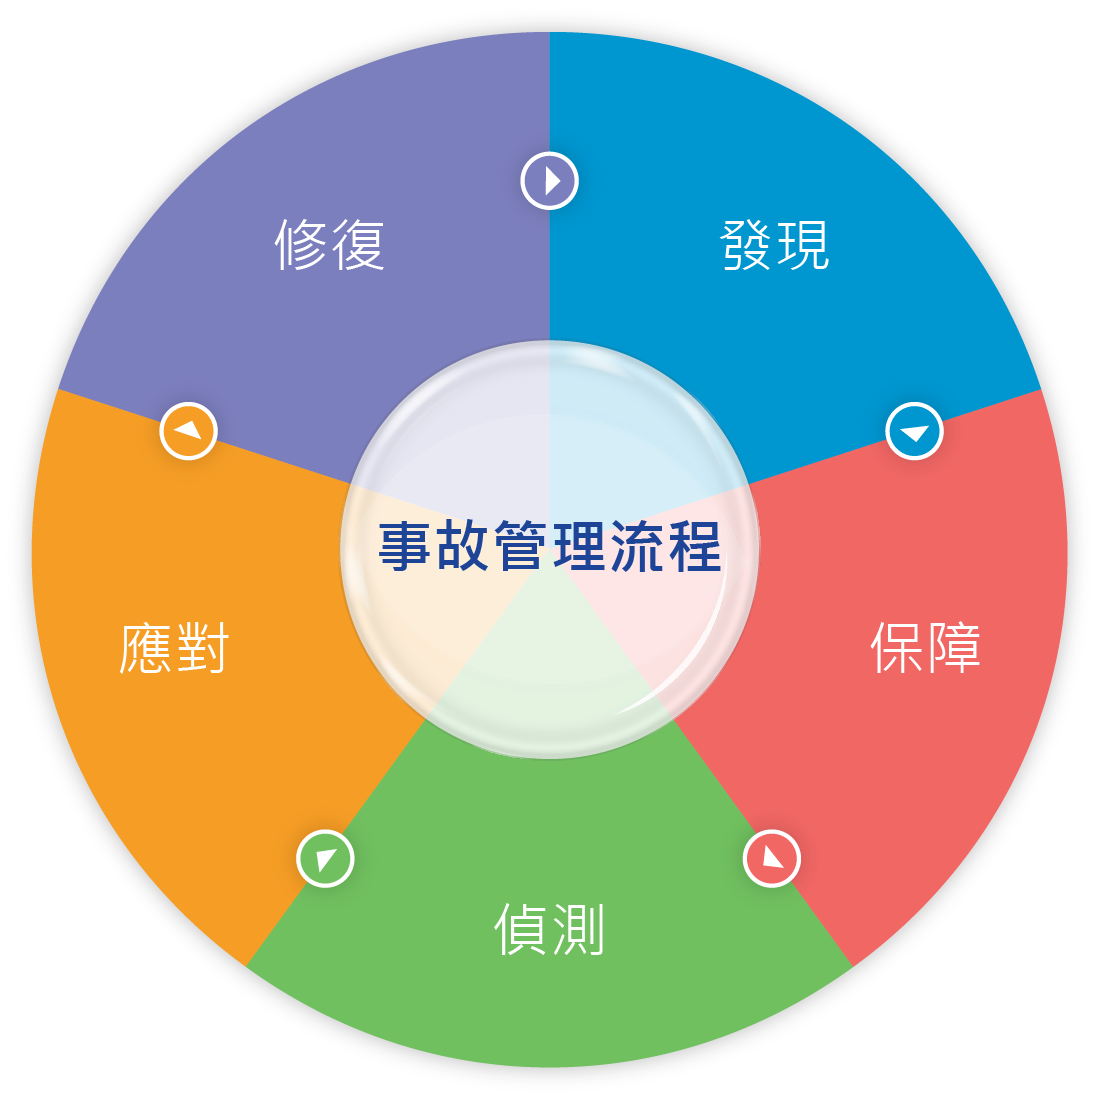 6.1.11_Incident_management_process (Chinese)